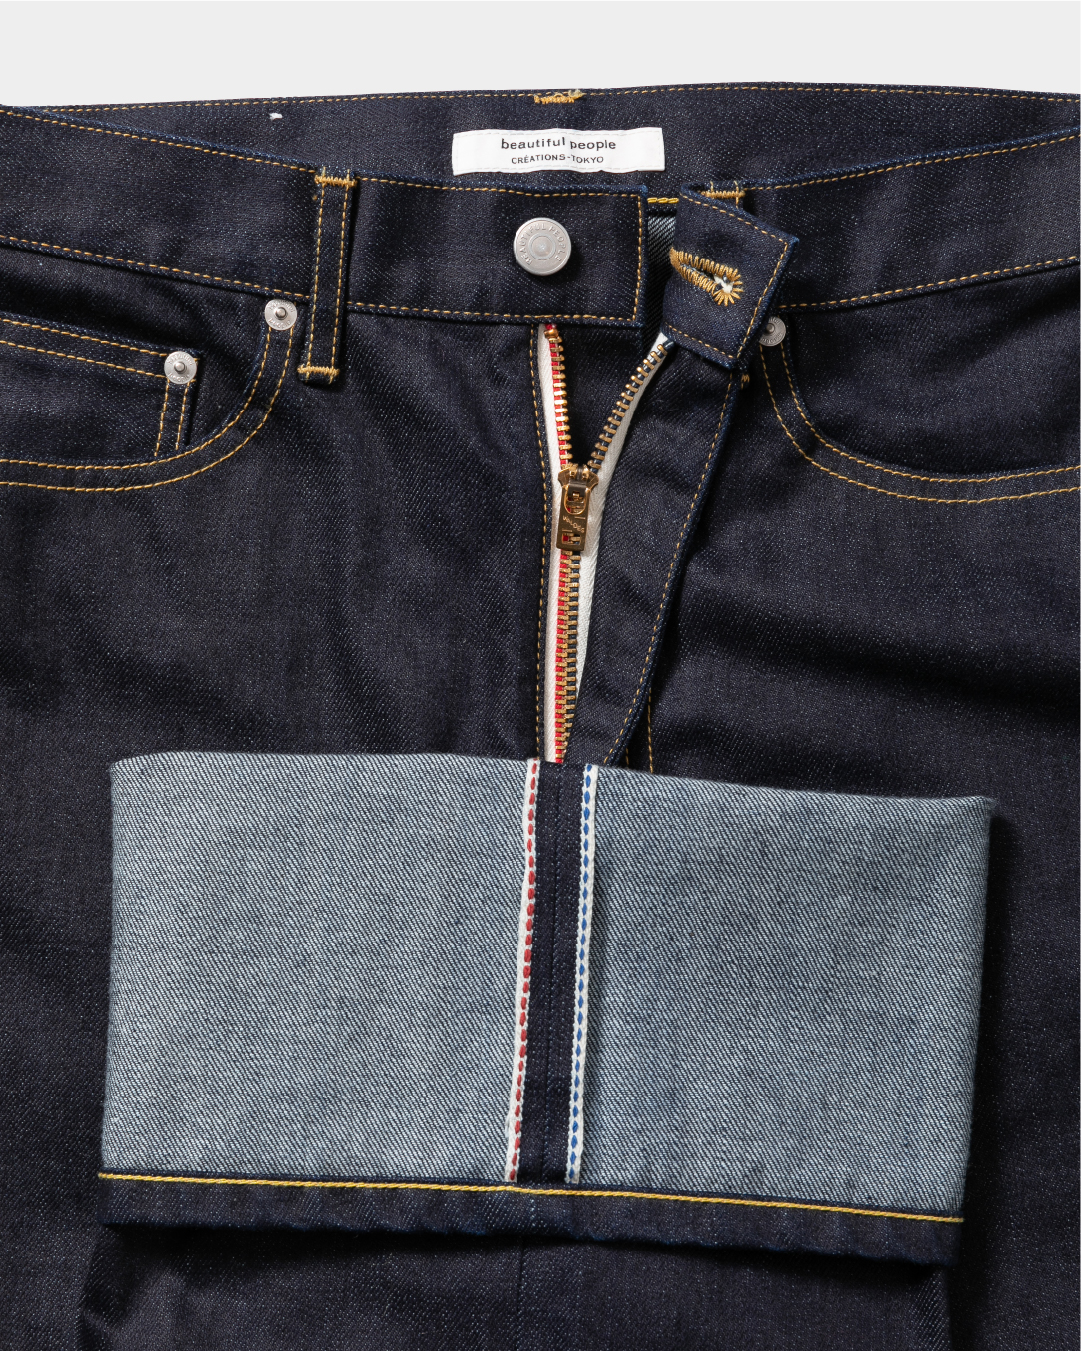 About THE / a Selvedge denim series | beautiful people